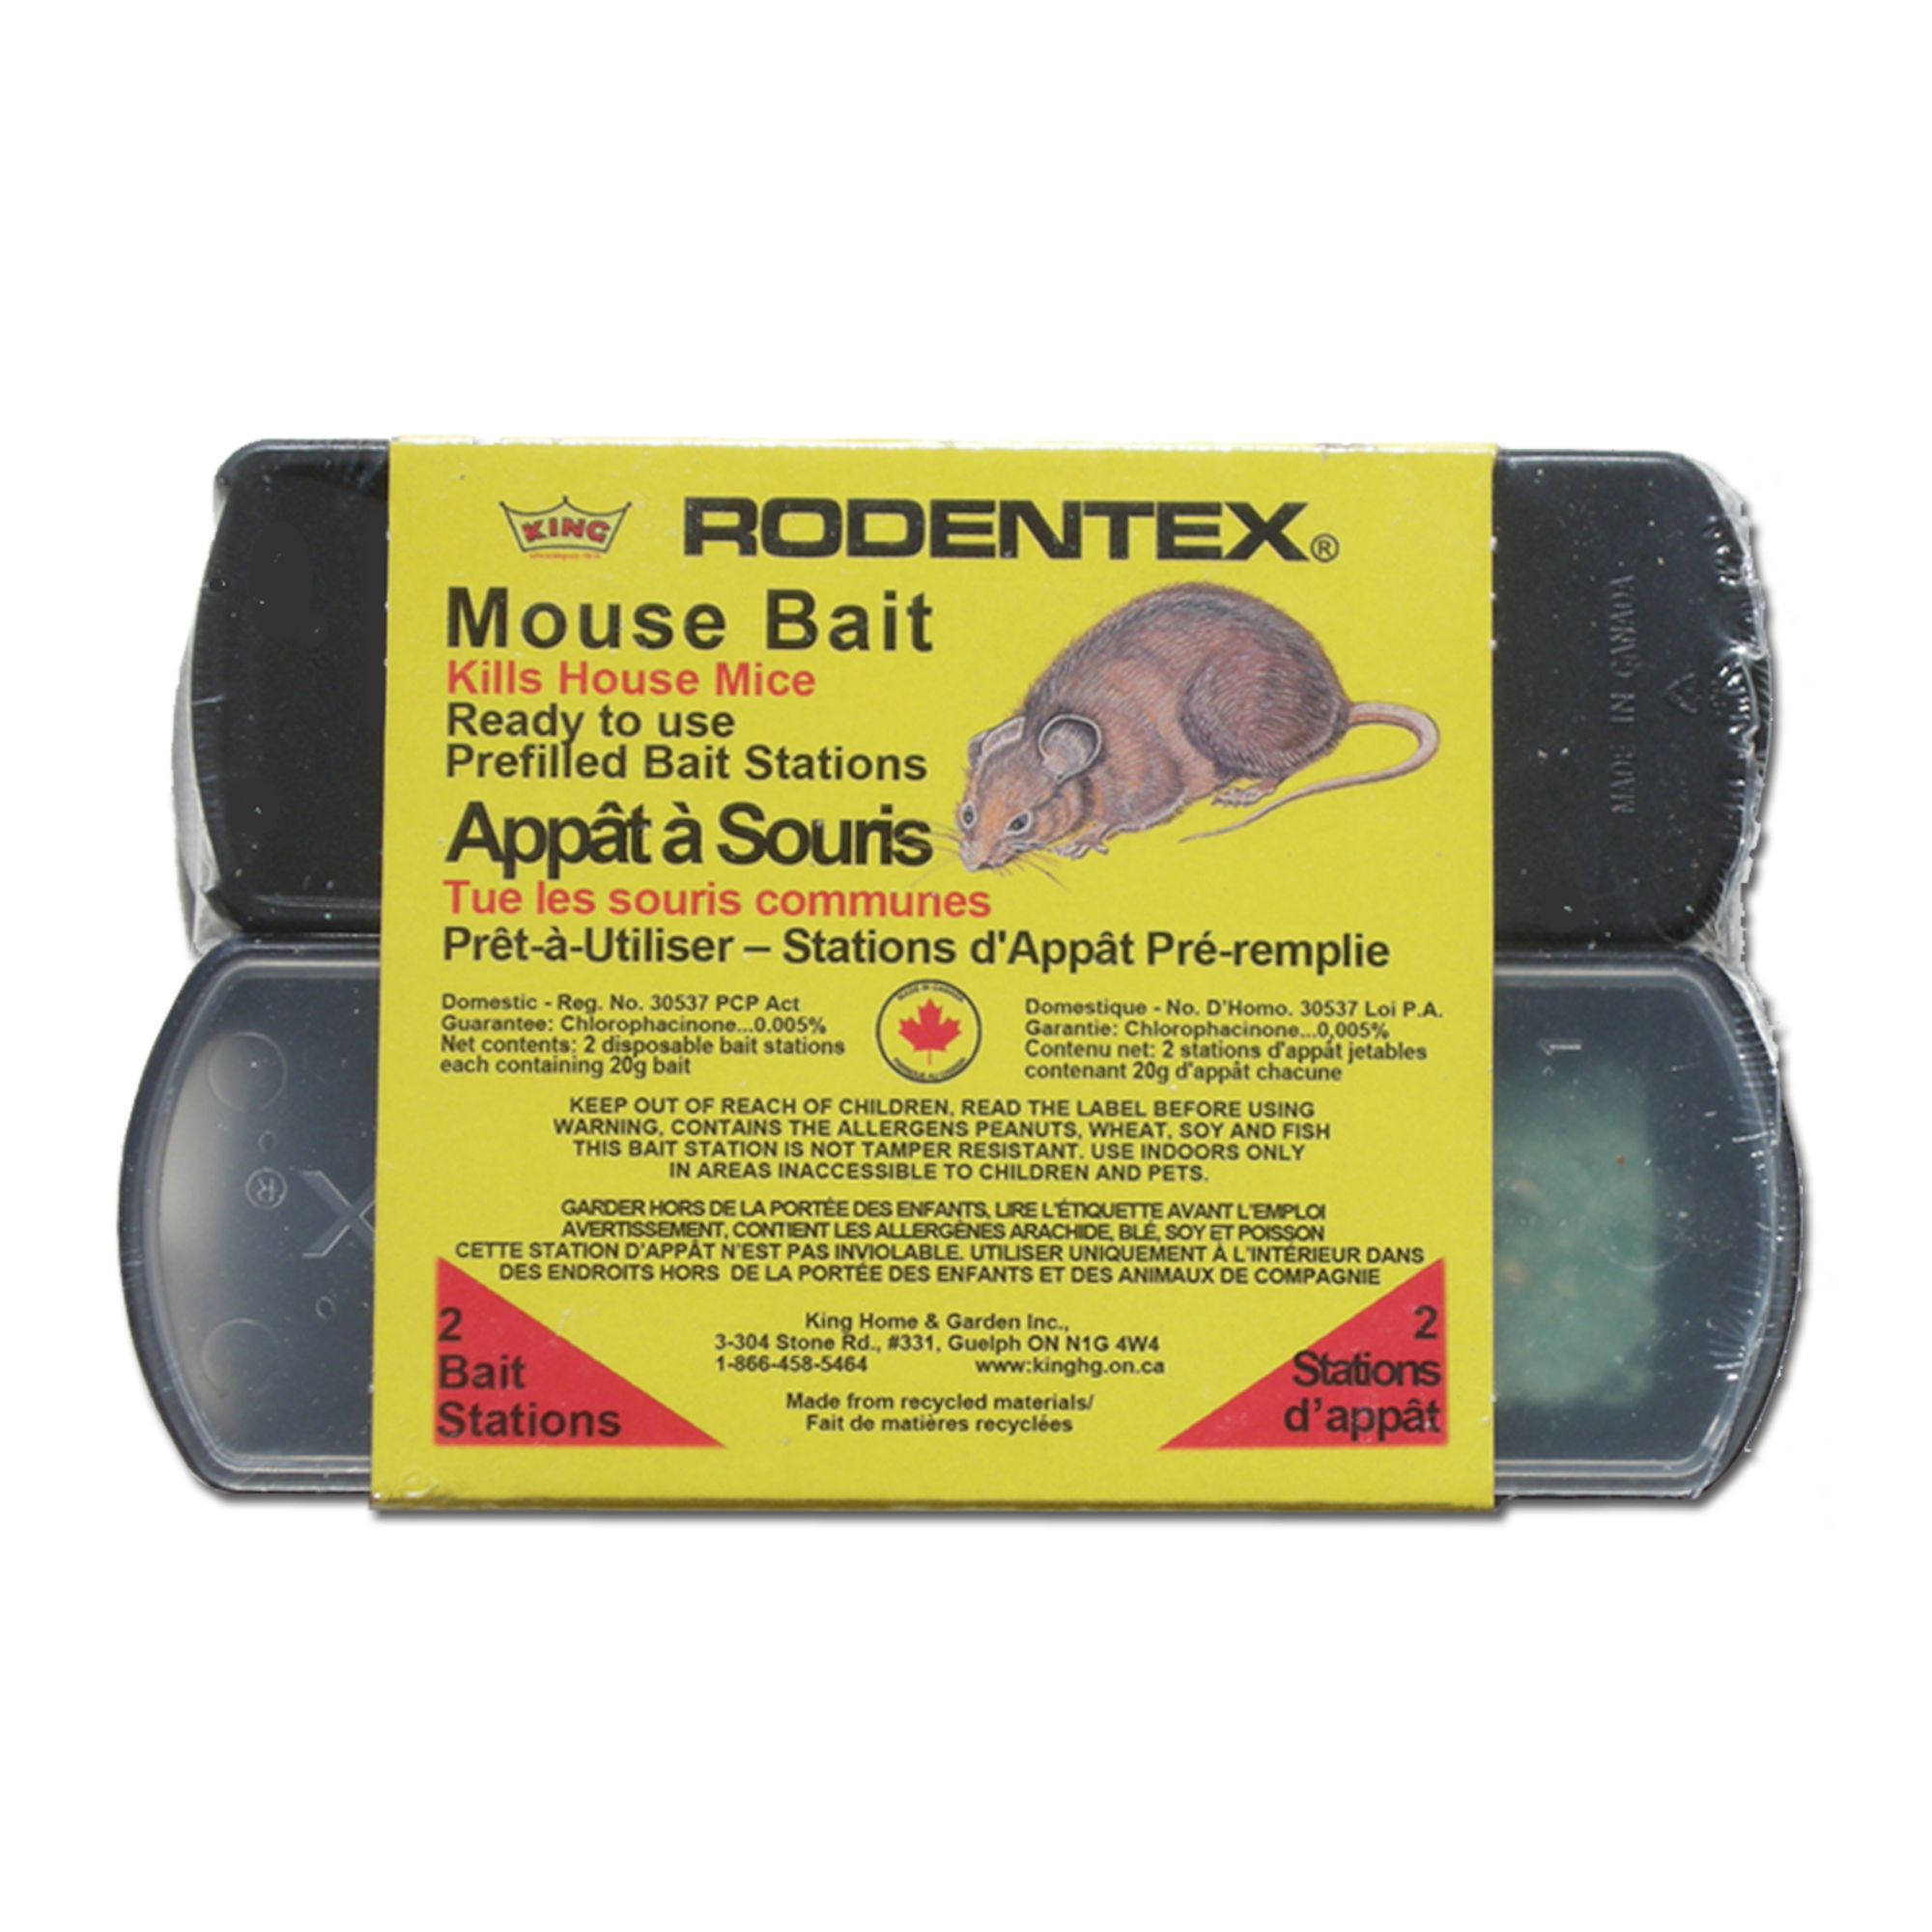 RODENTEX mouse bait from Superior Control Products